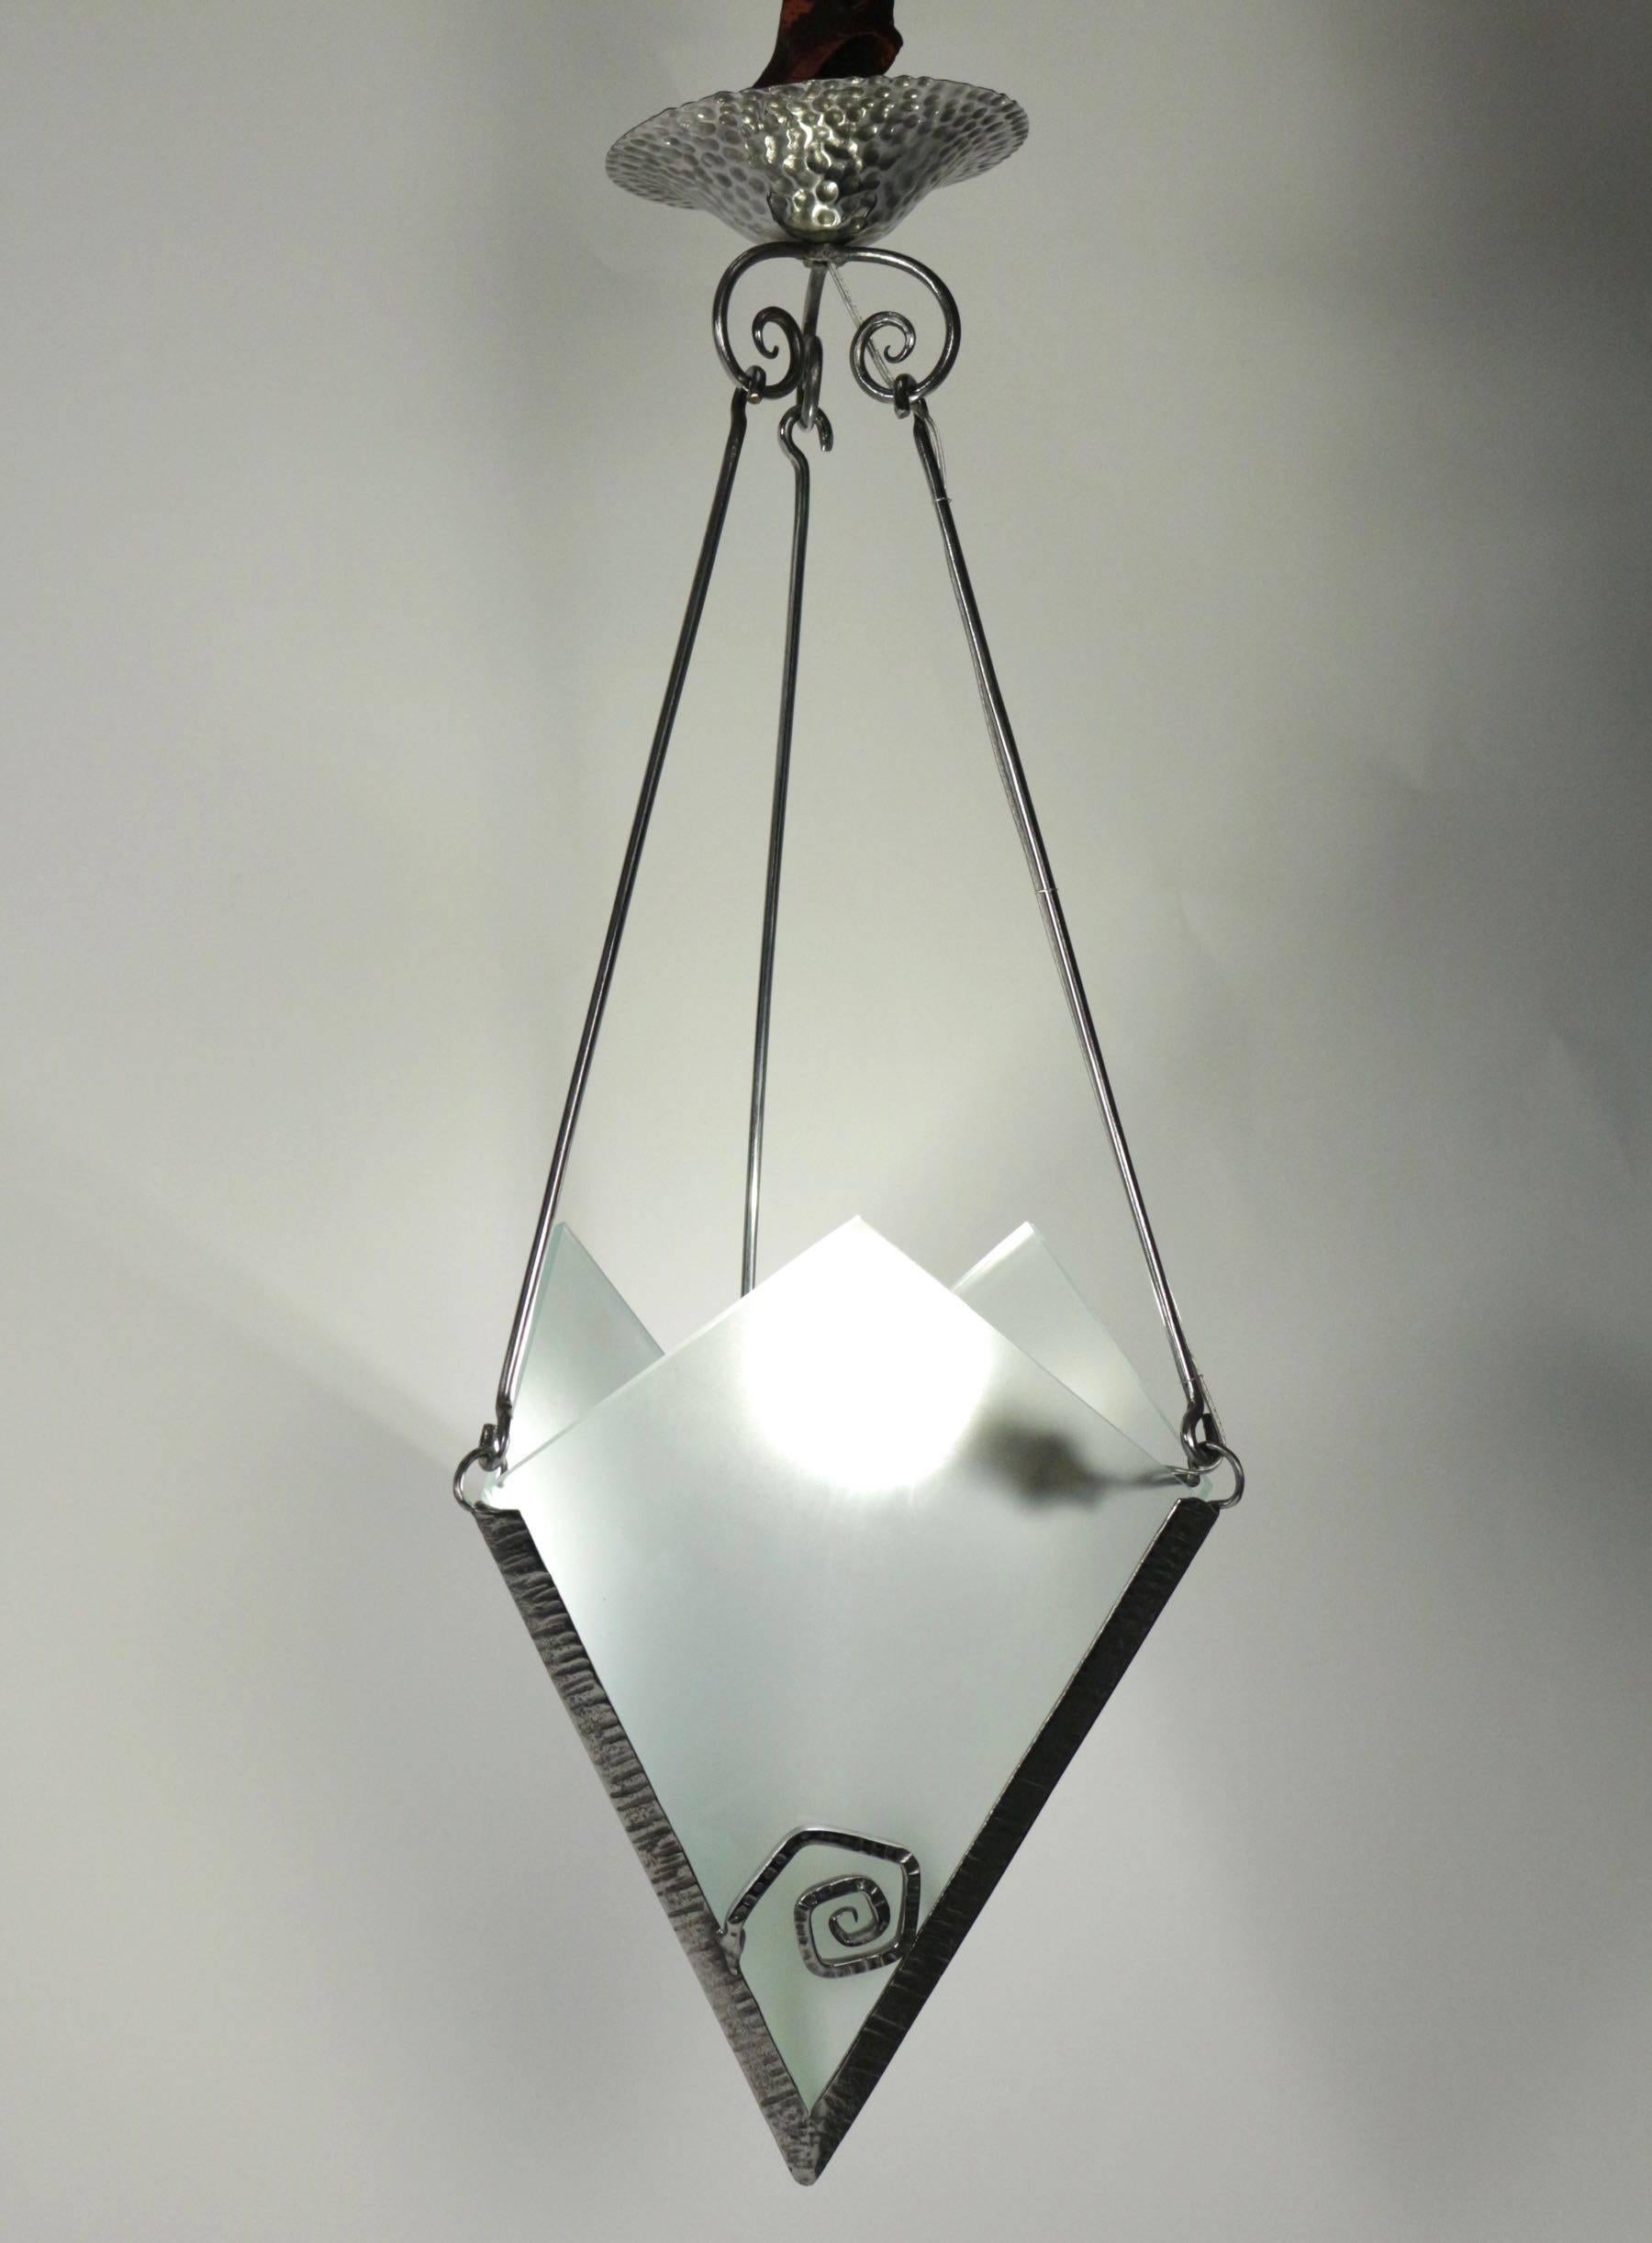 Pretty small Art Deco light fixture in etched glass and steel, circa 1930.
 